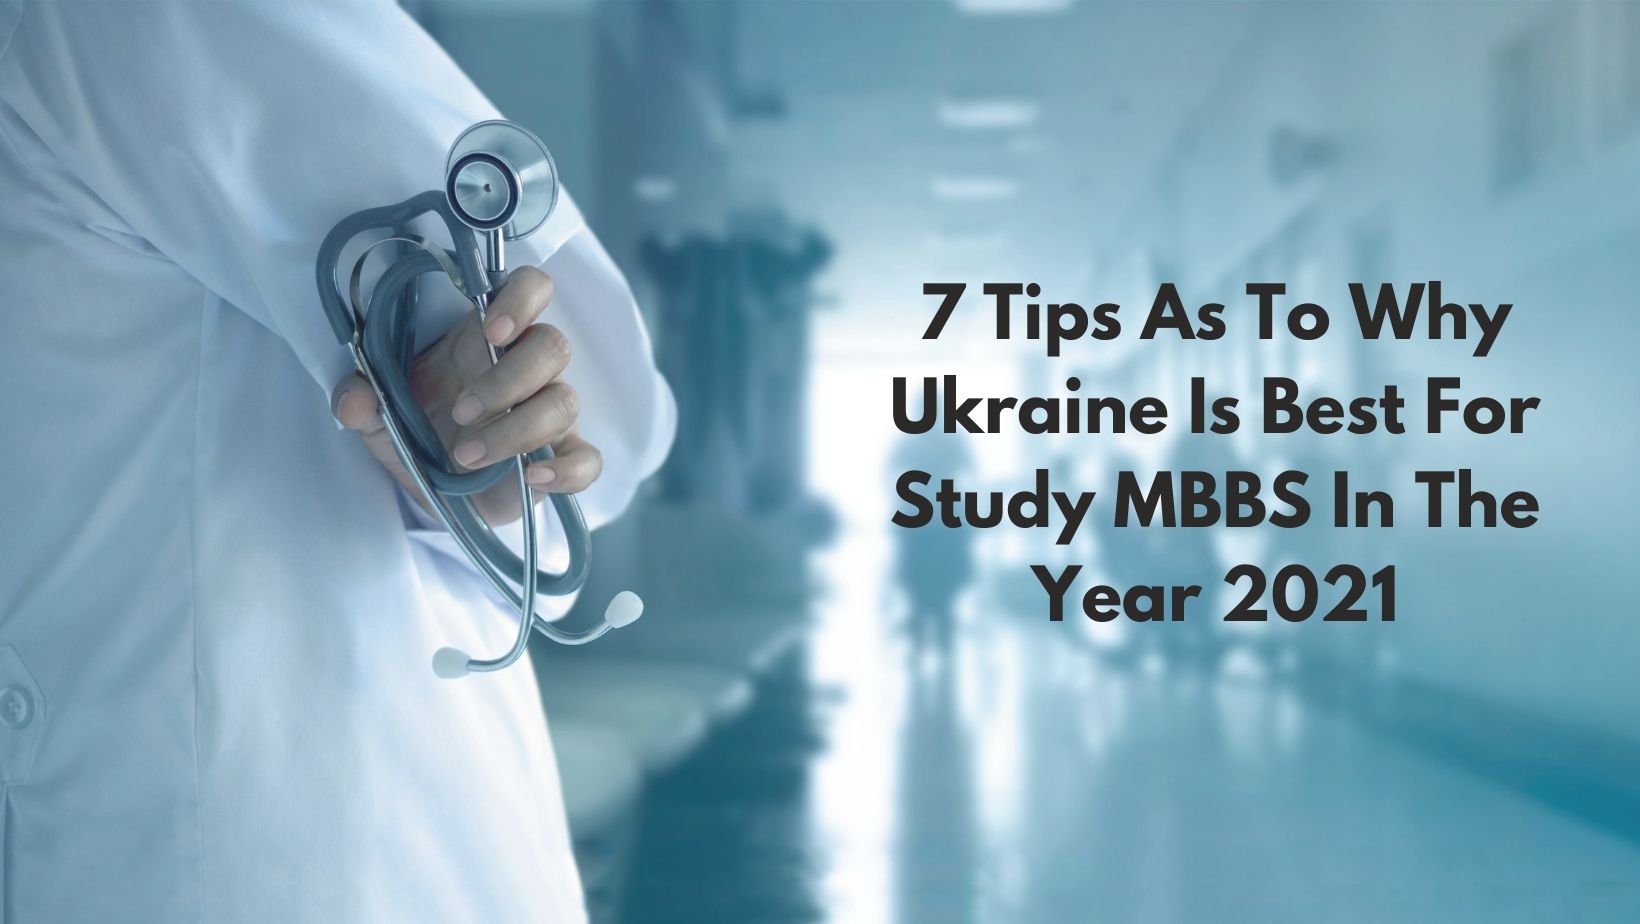 7 Tips As To Why Ukraine Is Best For Study MBBS In The Year 2021